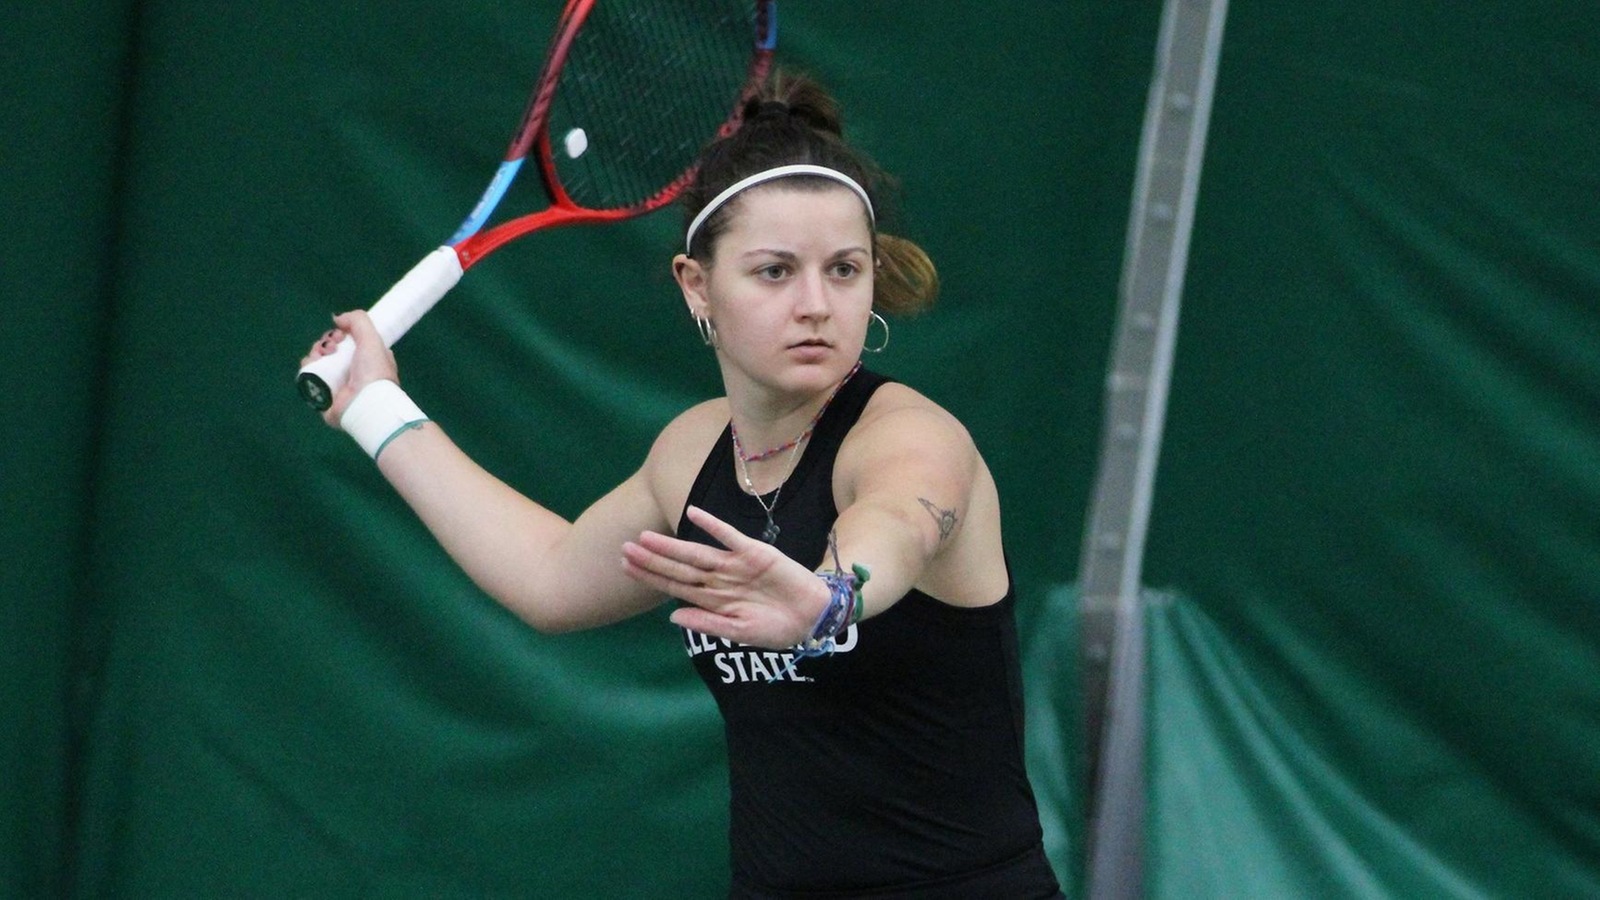 Vicario Named #HLTennis Singles Player of the Week